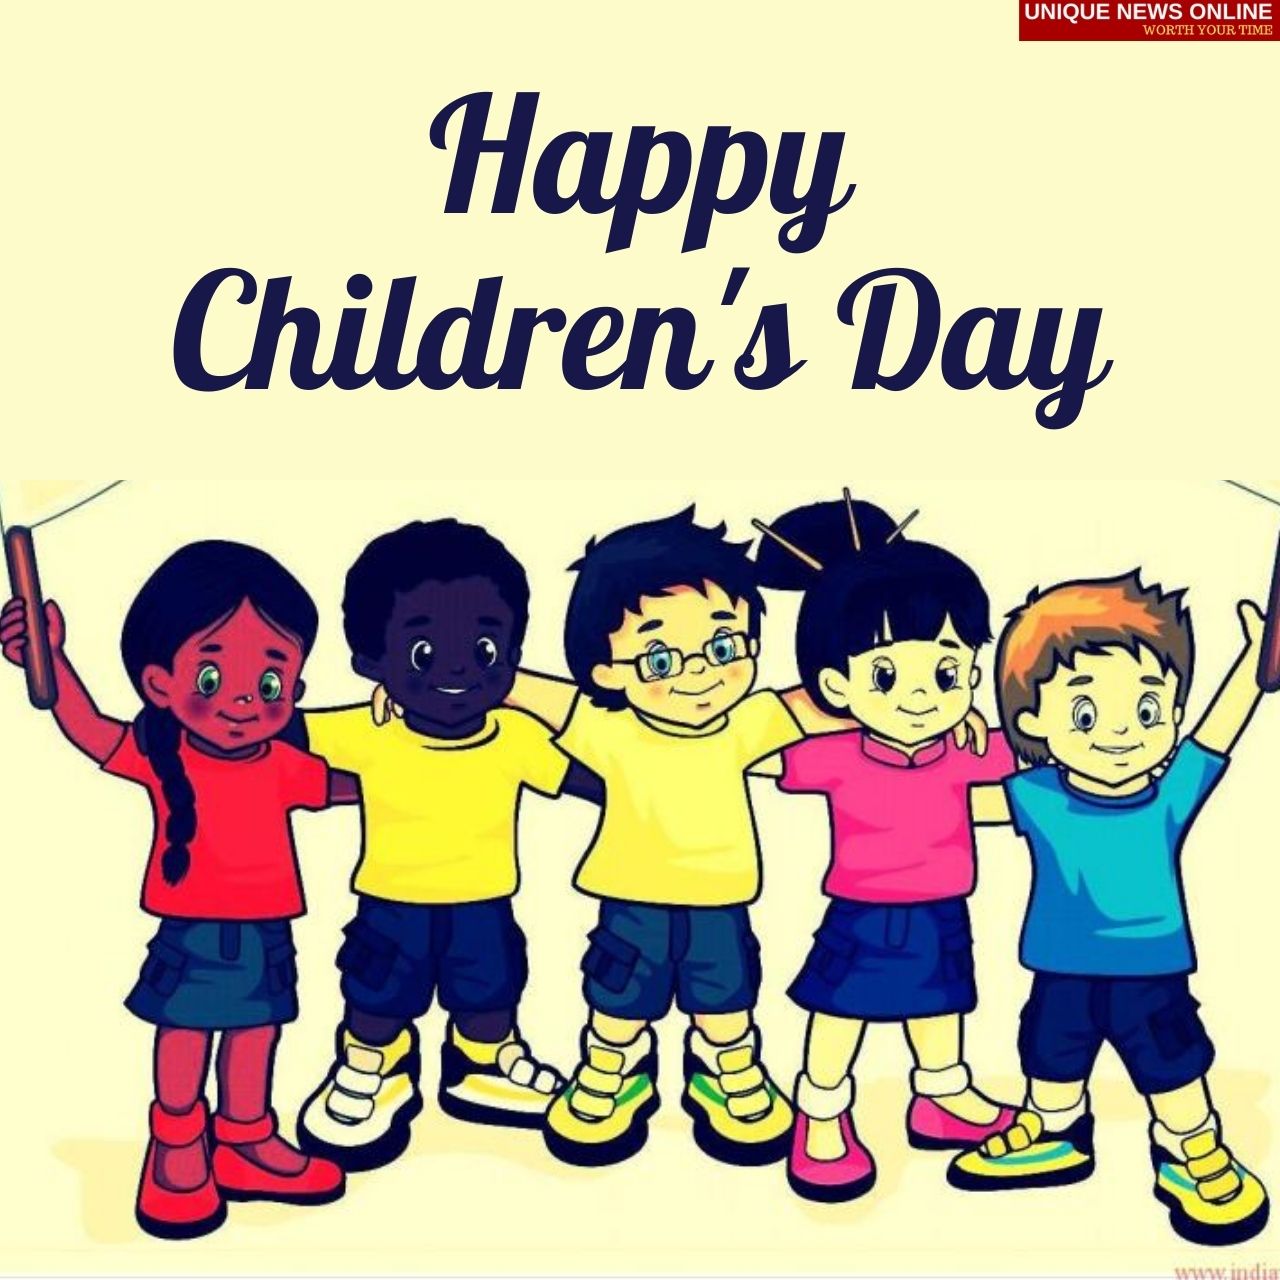 Happy Children's Day 2021 Wishes, Quotes, HD Images, Greetings, and Messages from Teachers or Principal to Students